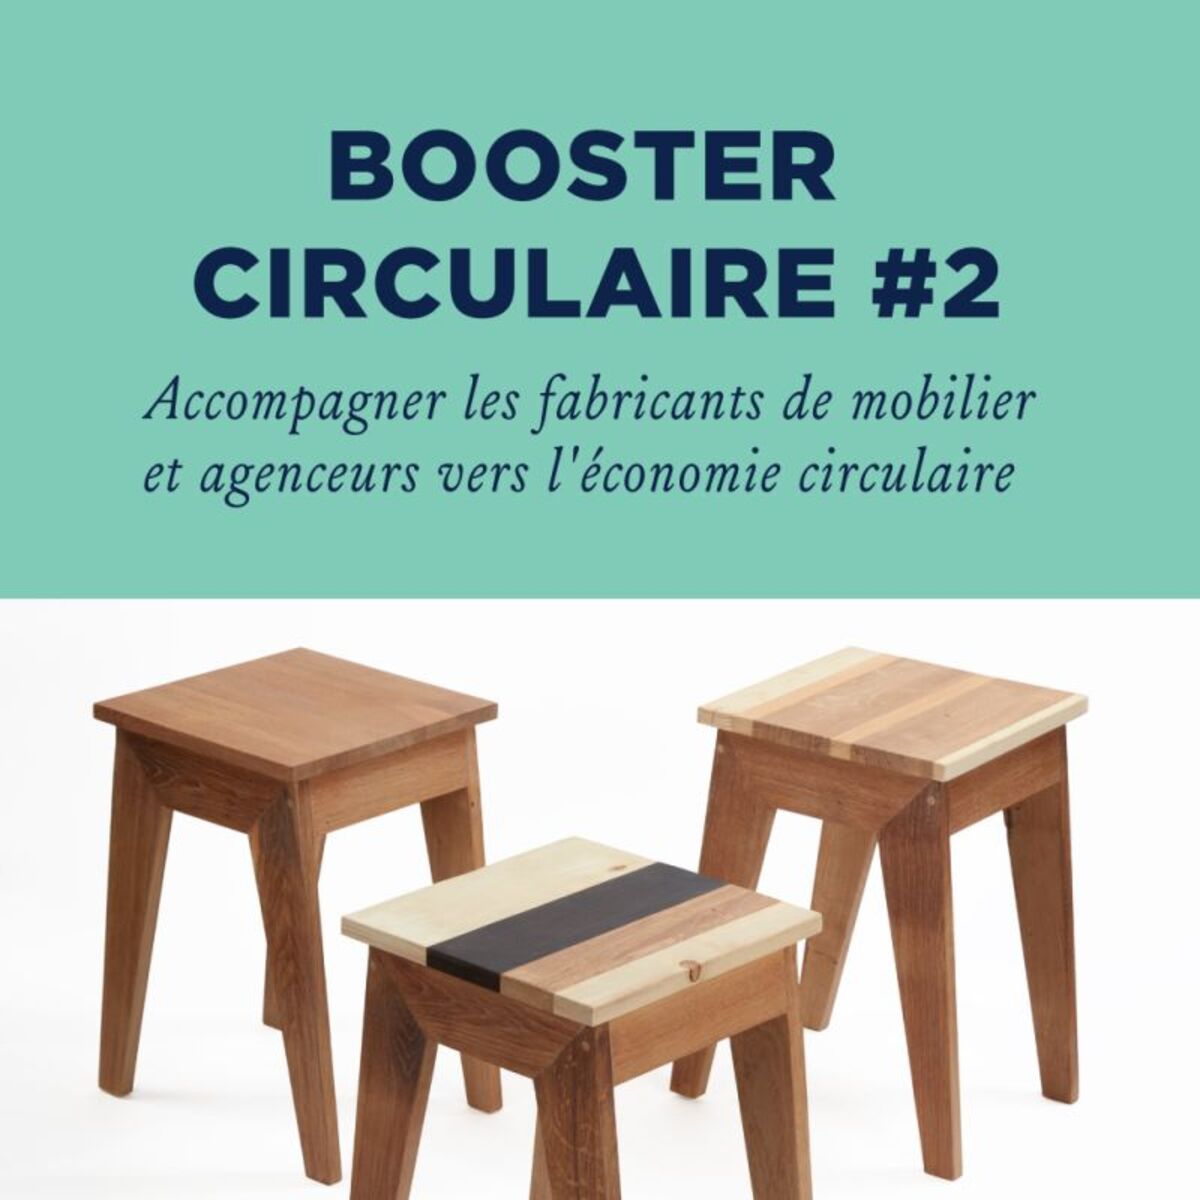 [AAC] BOOSTER CIRCULAIRE #2 LES CANAUX - Réunion d'information